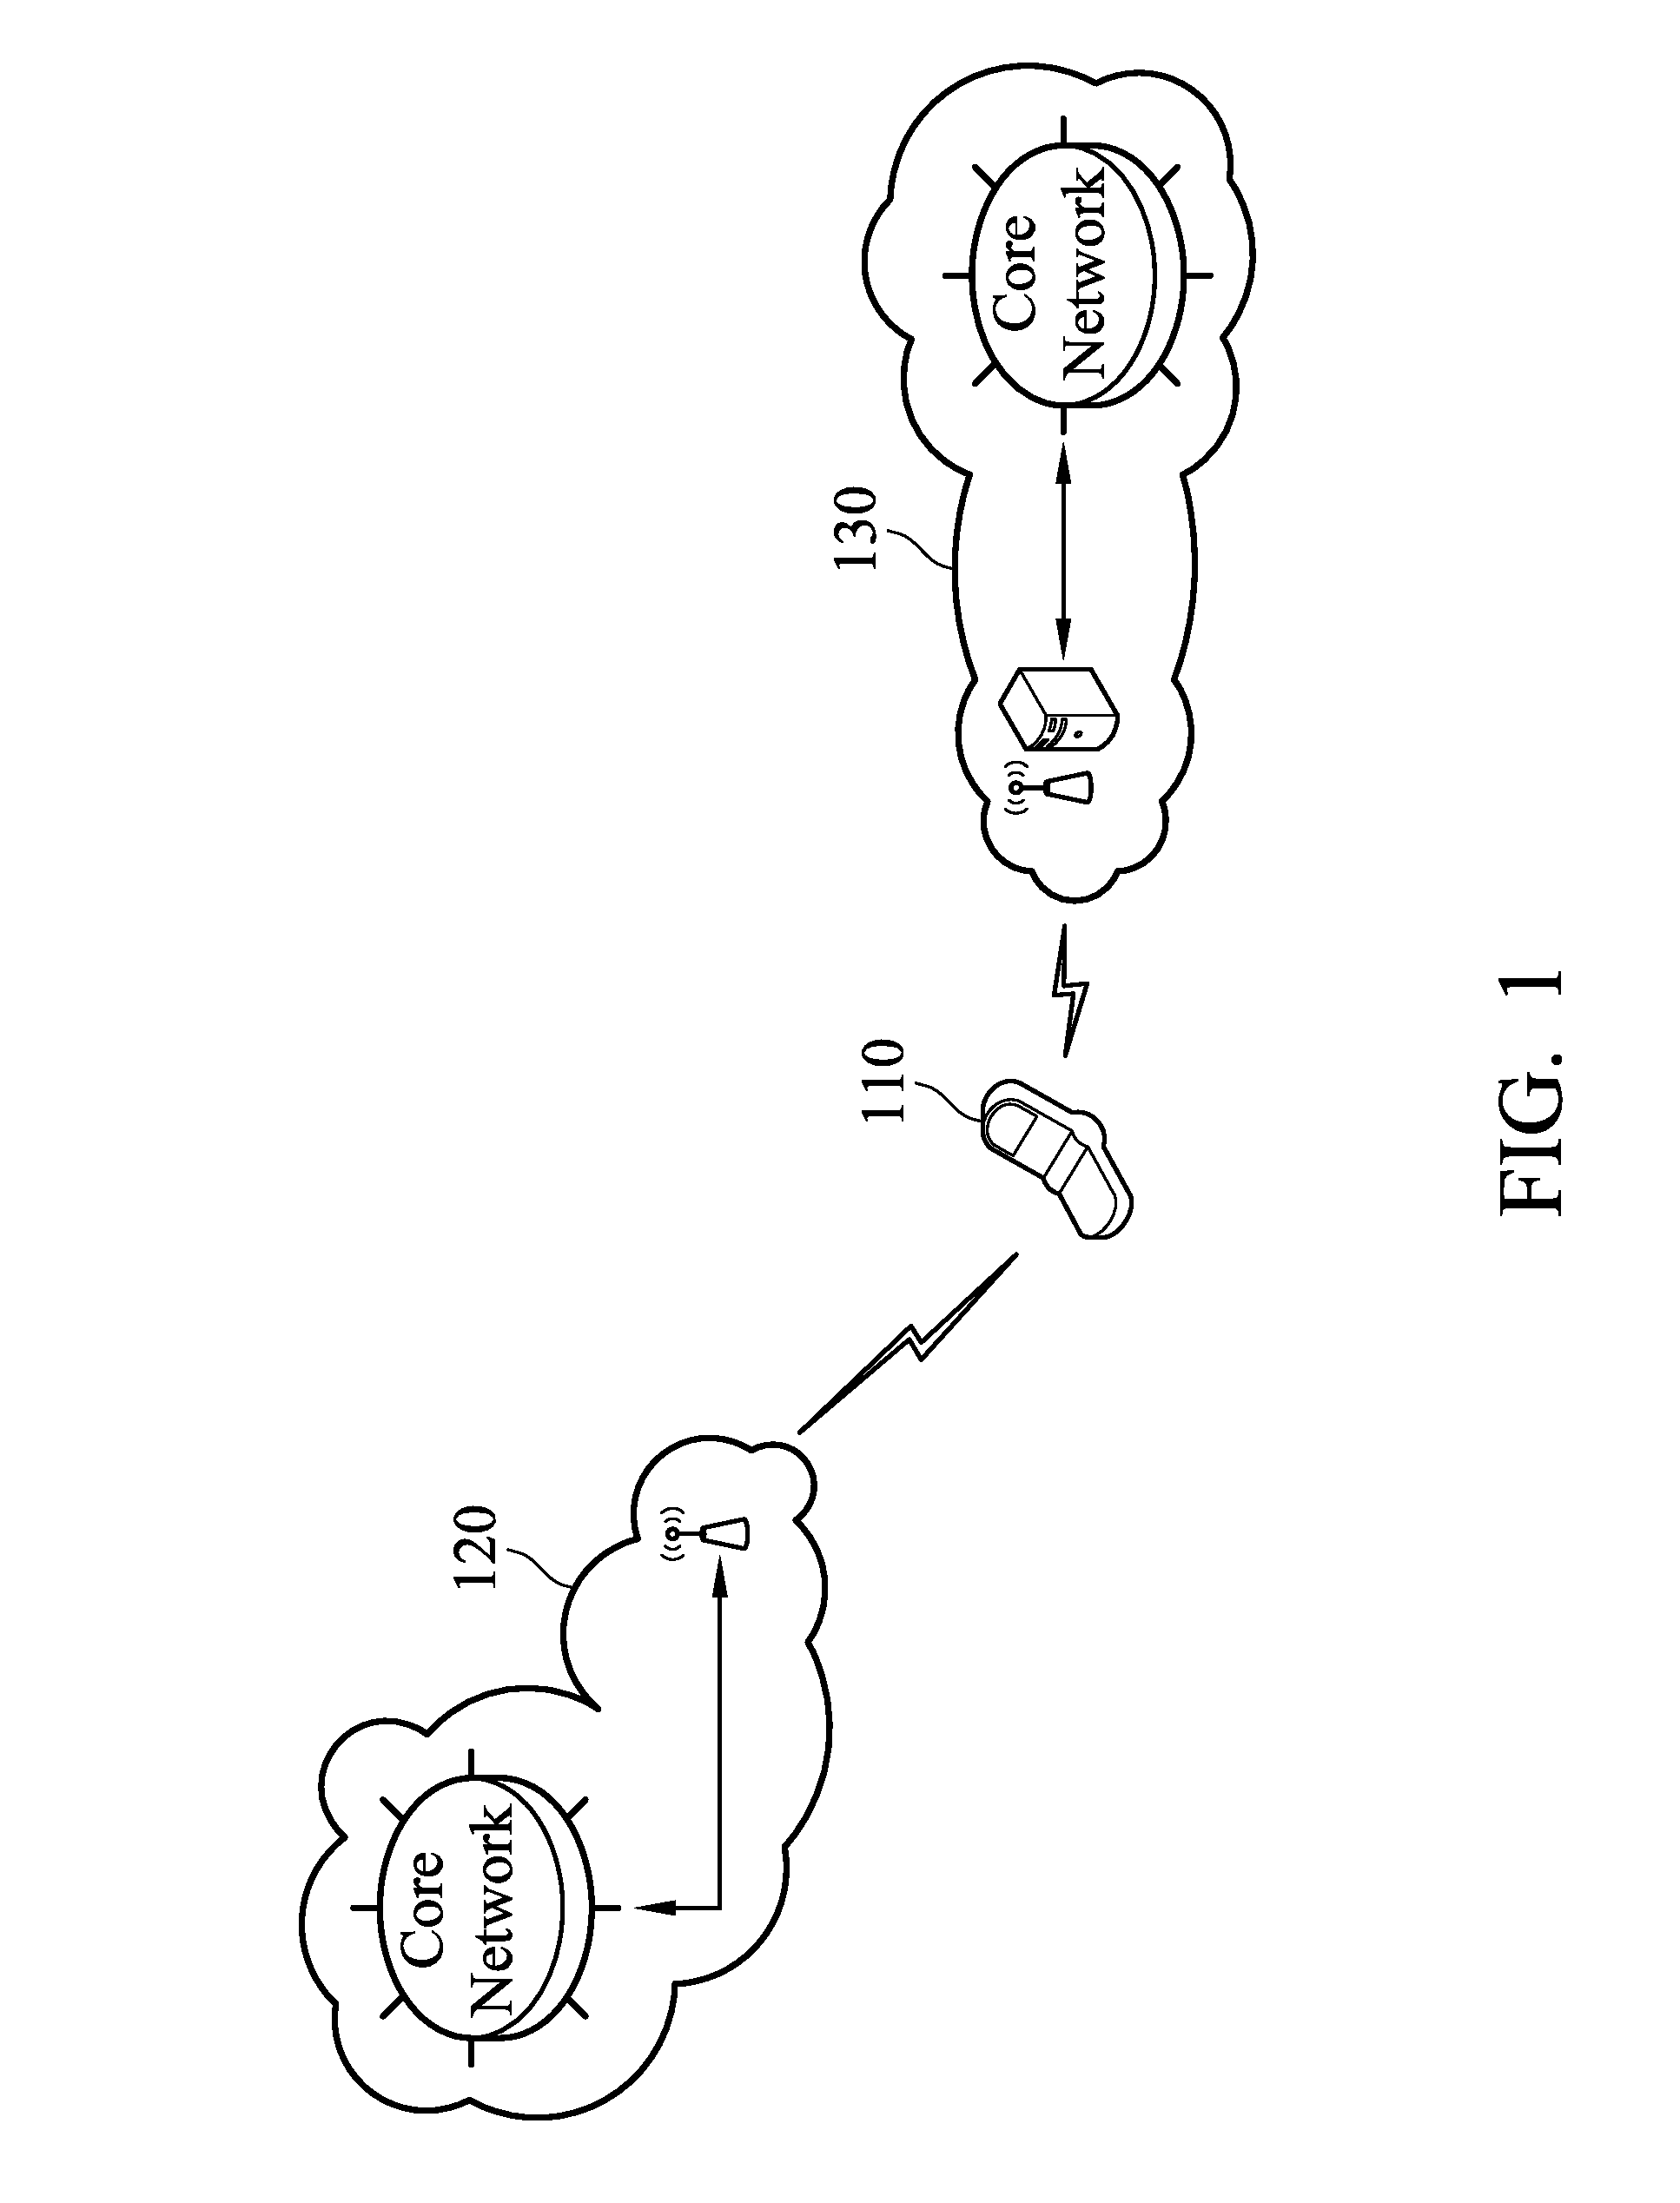 Apparatuses and methods for reducing circuit switch fallback (CSFB) call setup time